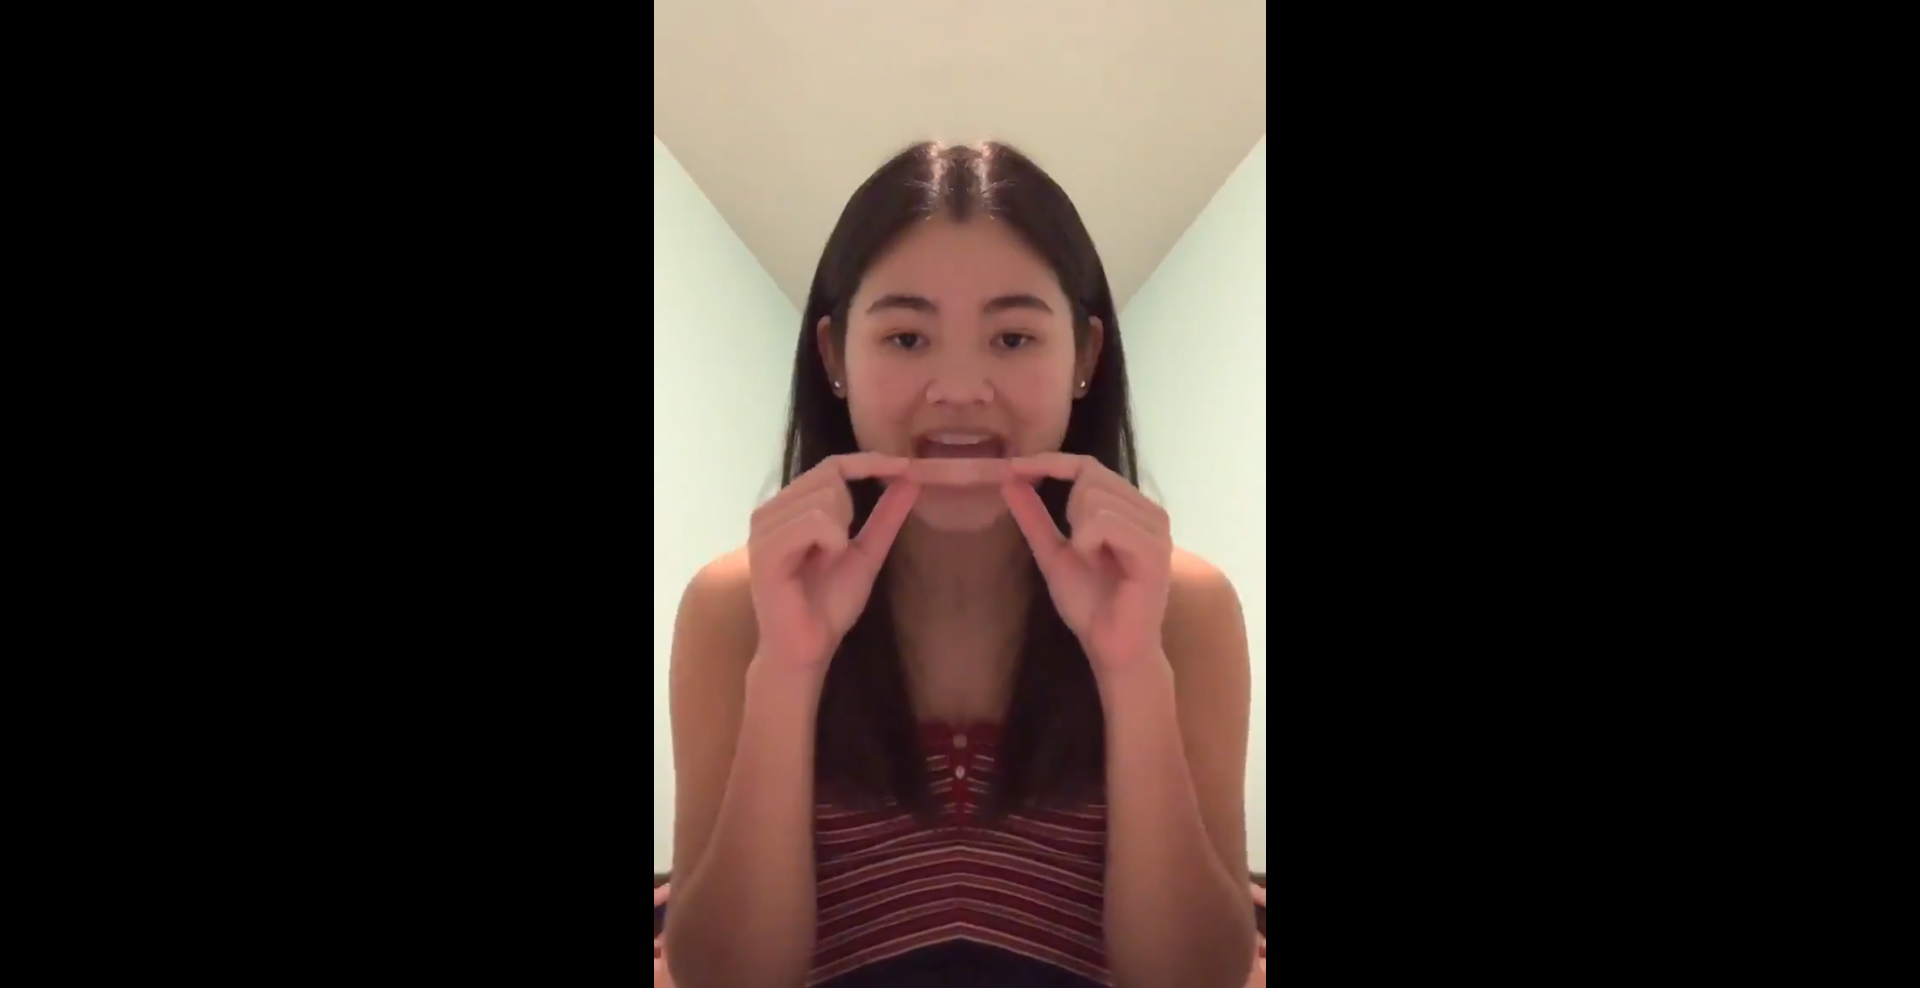 Tik Tok users eating their own fingers as Vine founder asks which TikTok accounts to follow